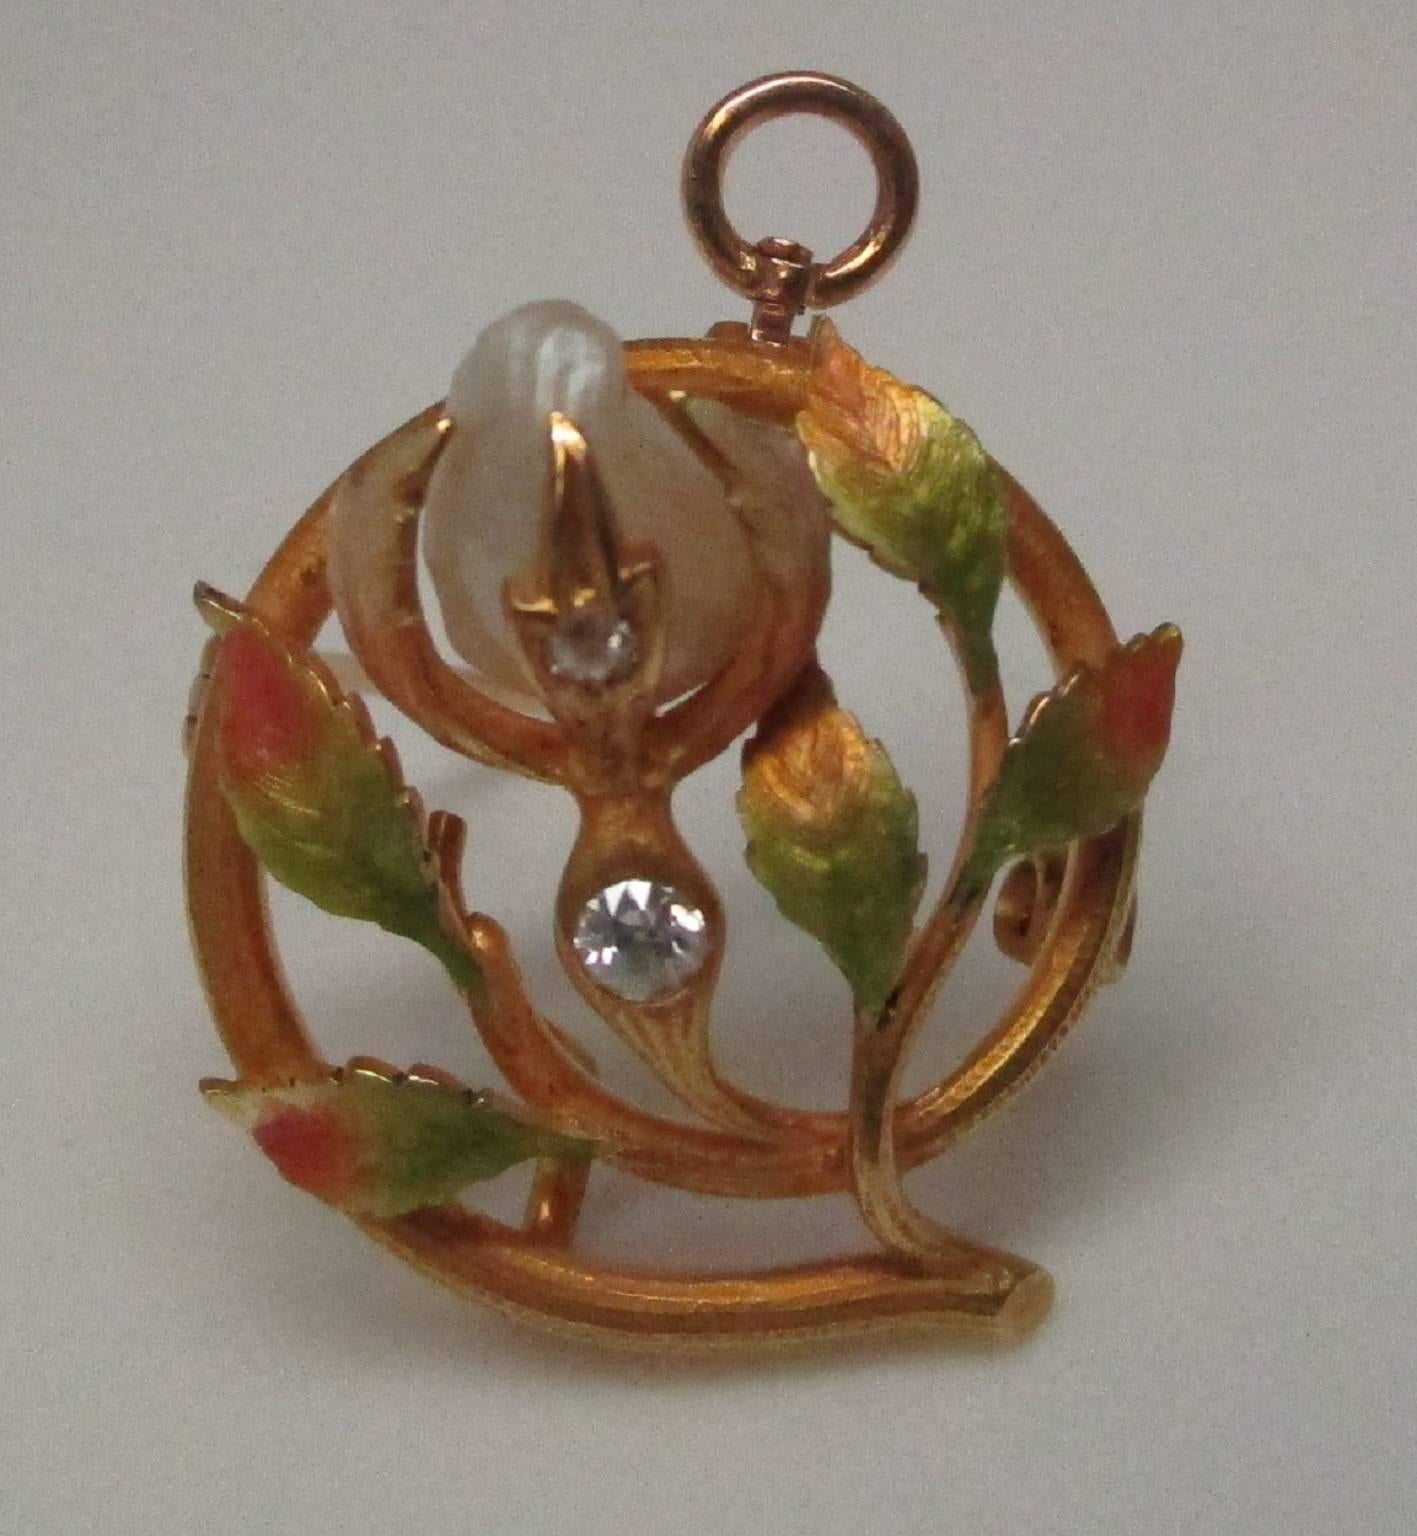 This 14 karat yellow gold pin/pendant is a lovely example of Art Nouveau floral motif. It features two diamonds, 0.05 carat in total, and a natural Mississippi Delta pearl. The Mississippi Delta pearl is not found today due to over fishing. The pin